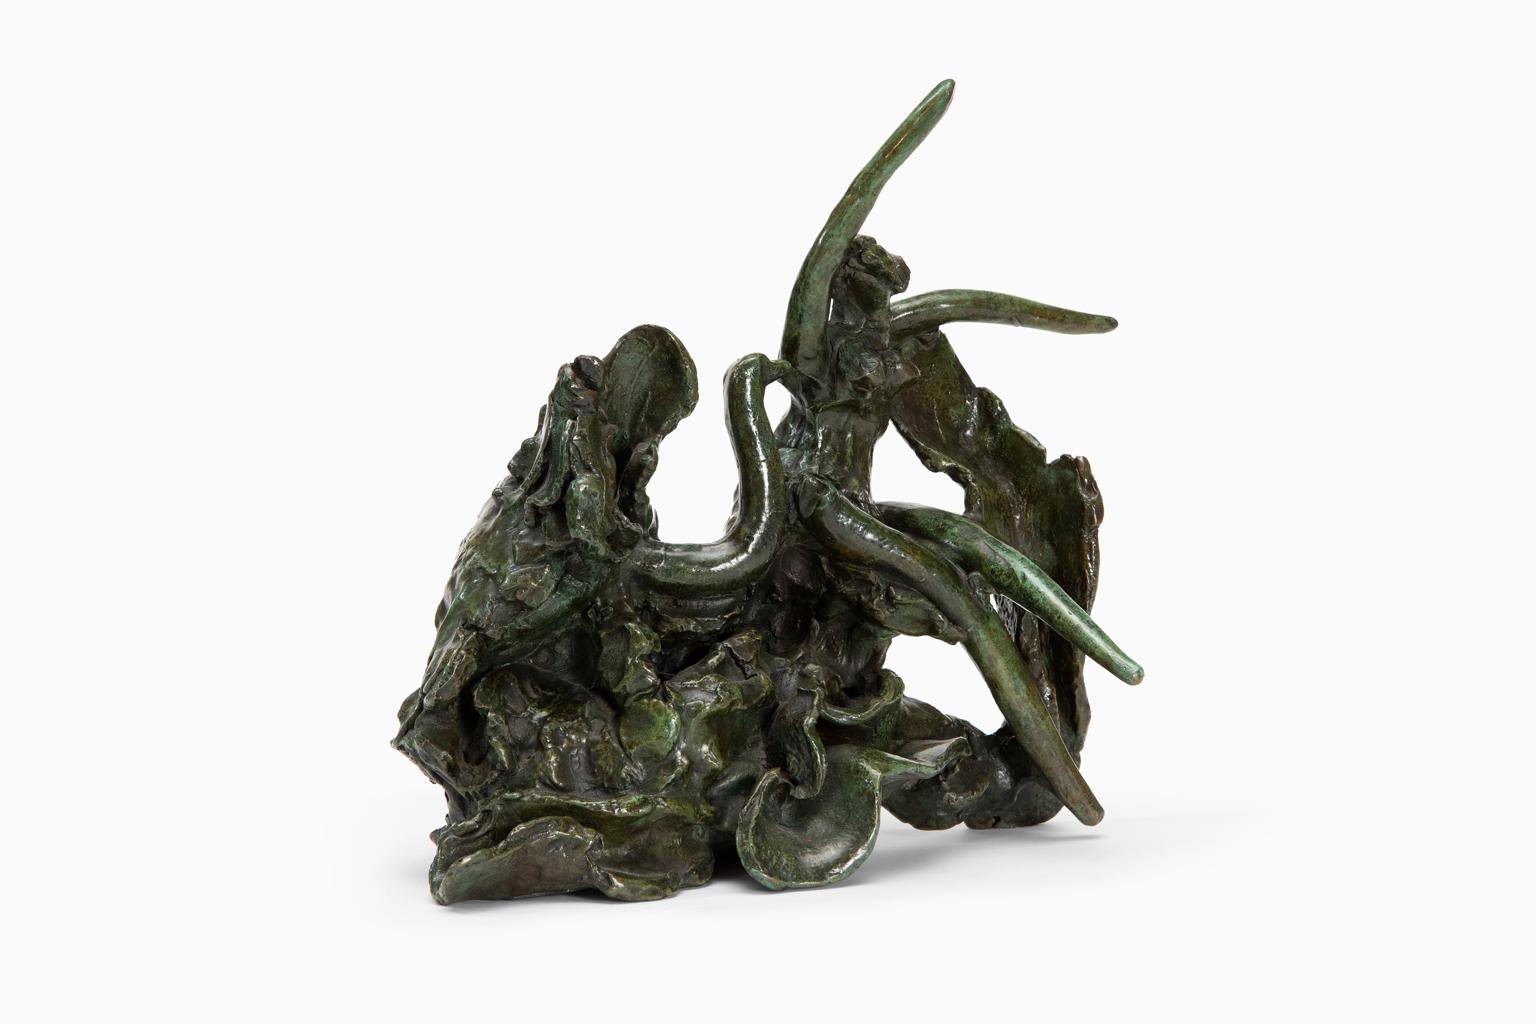 SALE ONE WEEK ONLY

“Leda and the Swan” is by Reuben Nakian (1897 - 1986). He was an American sculptor and teacher of Armenian extraction. His works’ recurring themes are from Greek and Roman mythology. Nakian’s small bronzes achieve majesty and